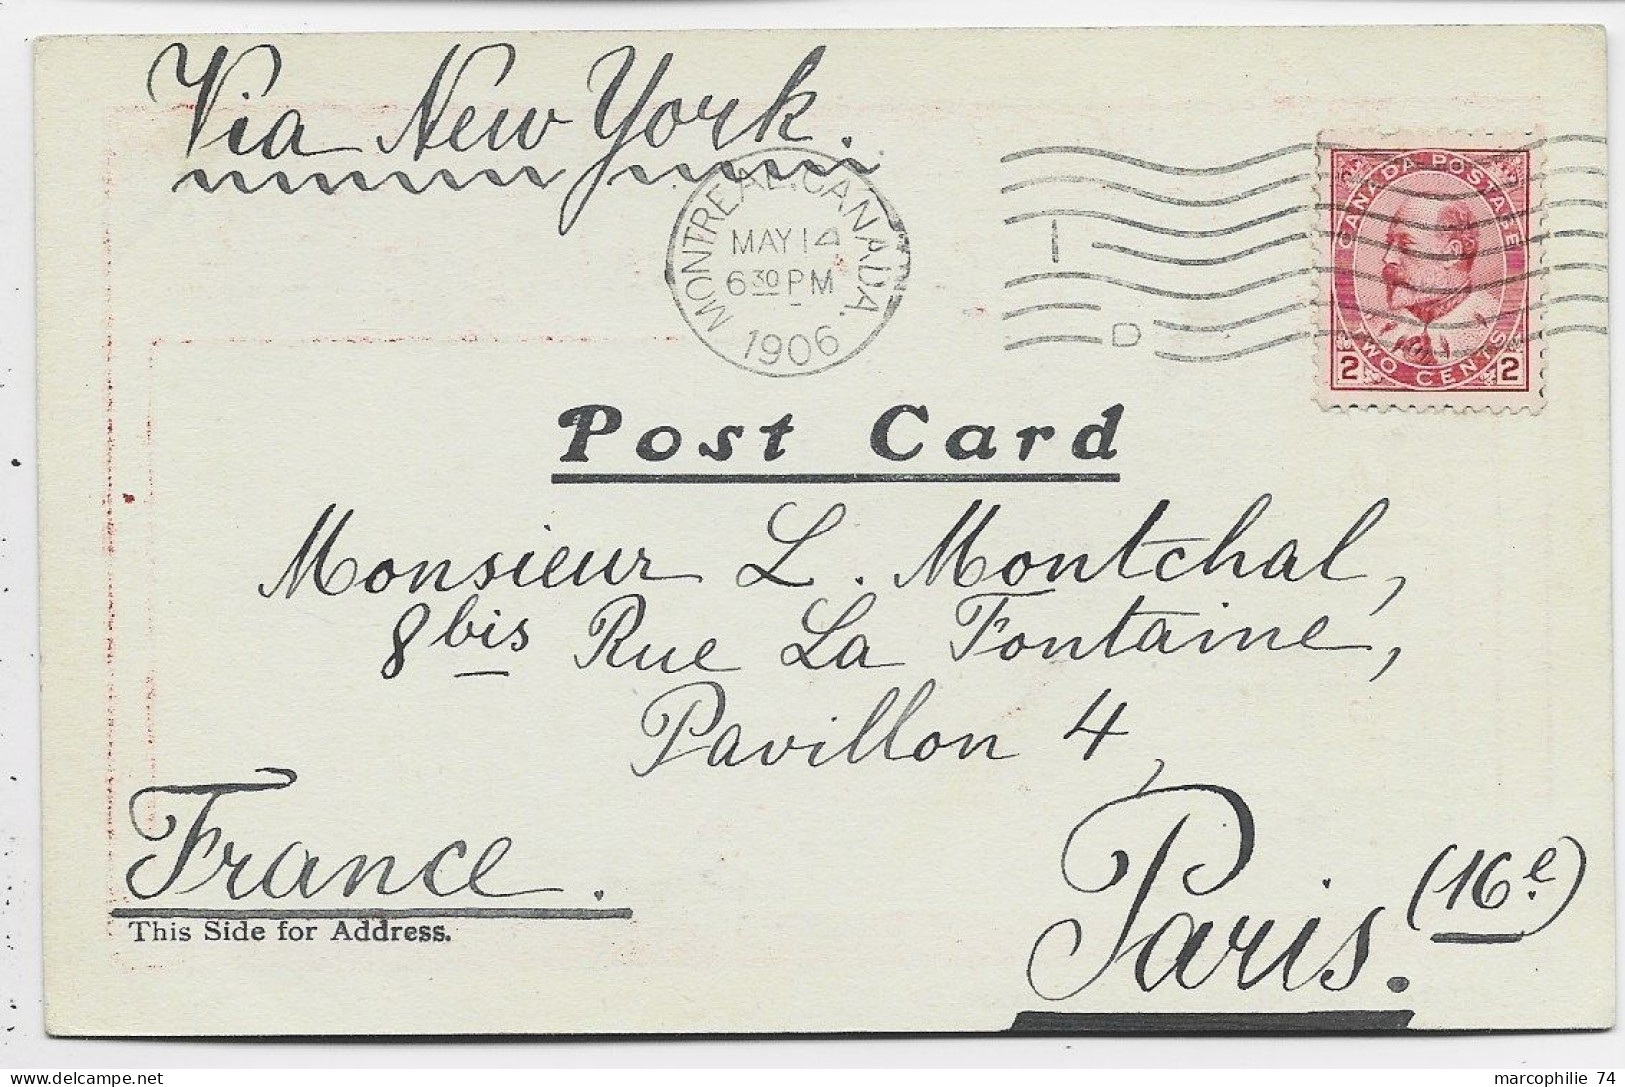 CANADA CARD MONTREAL AFTER A FEW BATHS BANFF HOT SPRINGS HOTEL 1905 POST CARD - Montreal